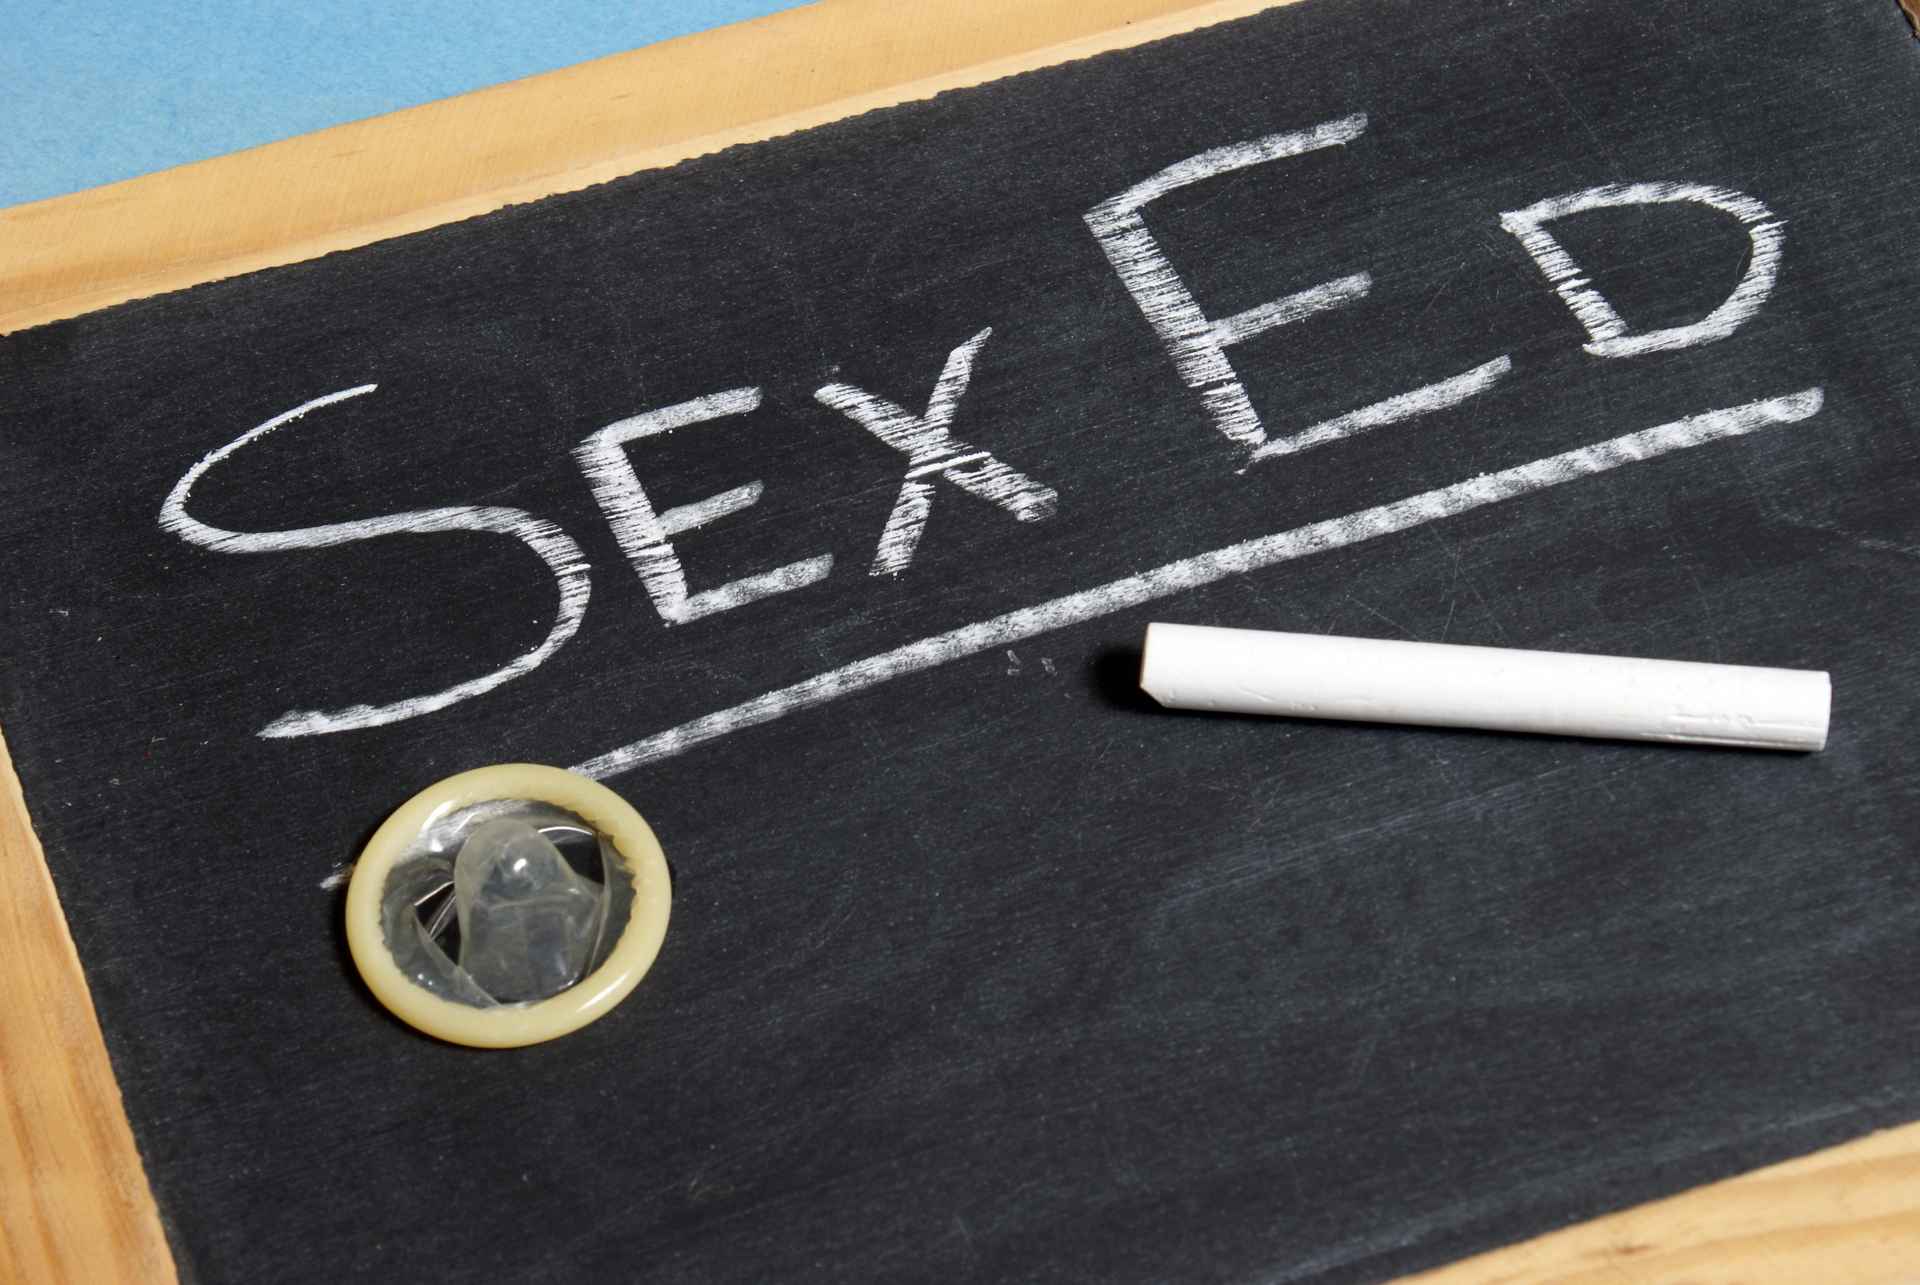 A Lesson from Professor Sex.